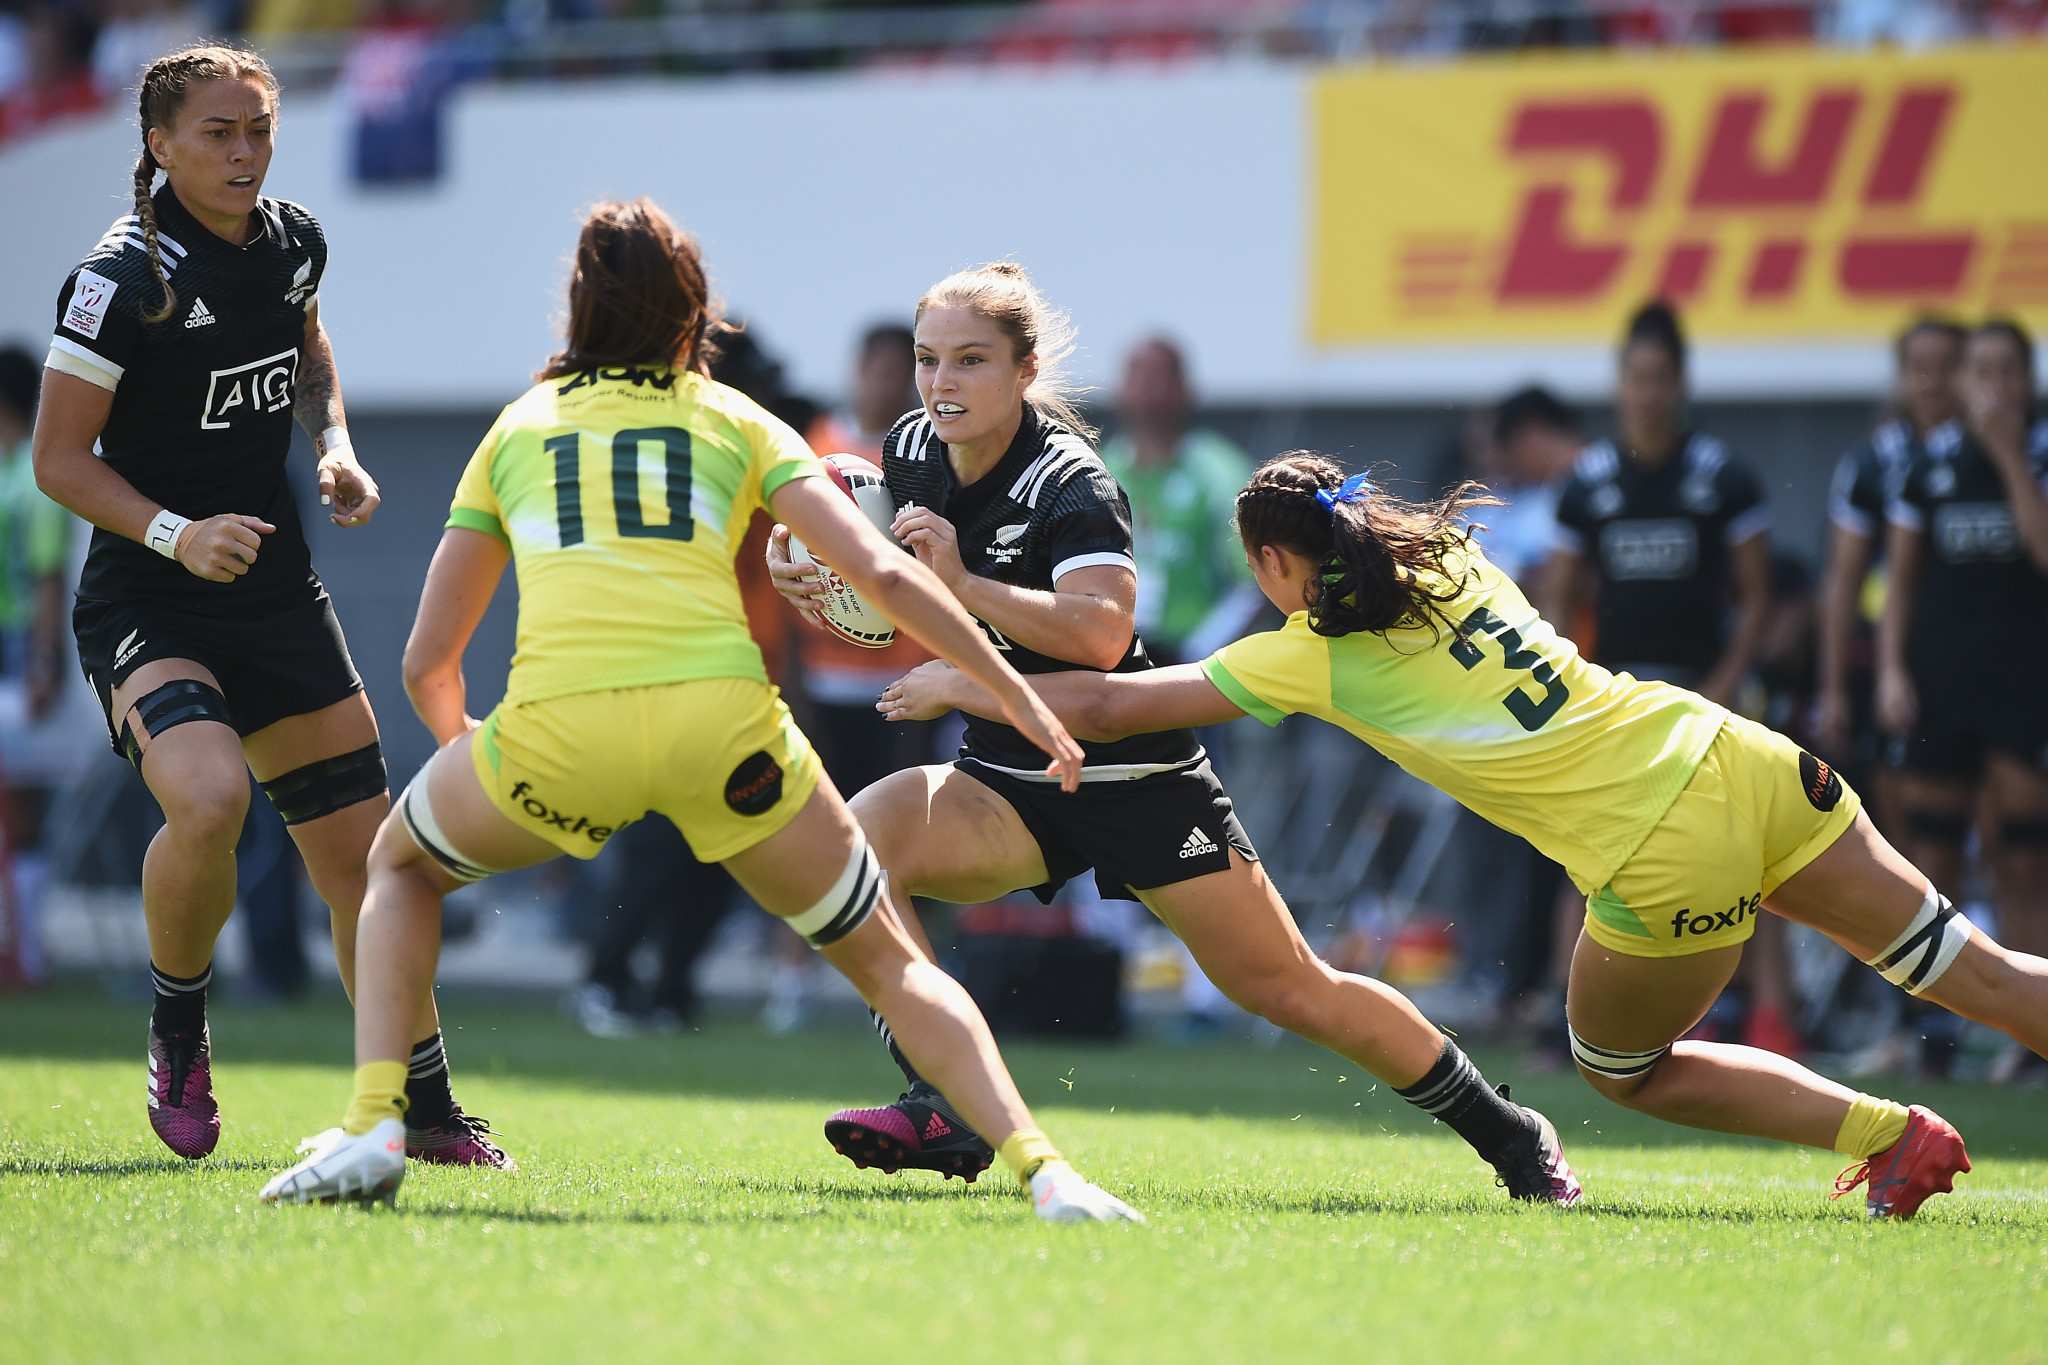 Australia and New Zealand announced as bidders for 2021 Women's Rugby World Cup